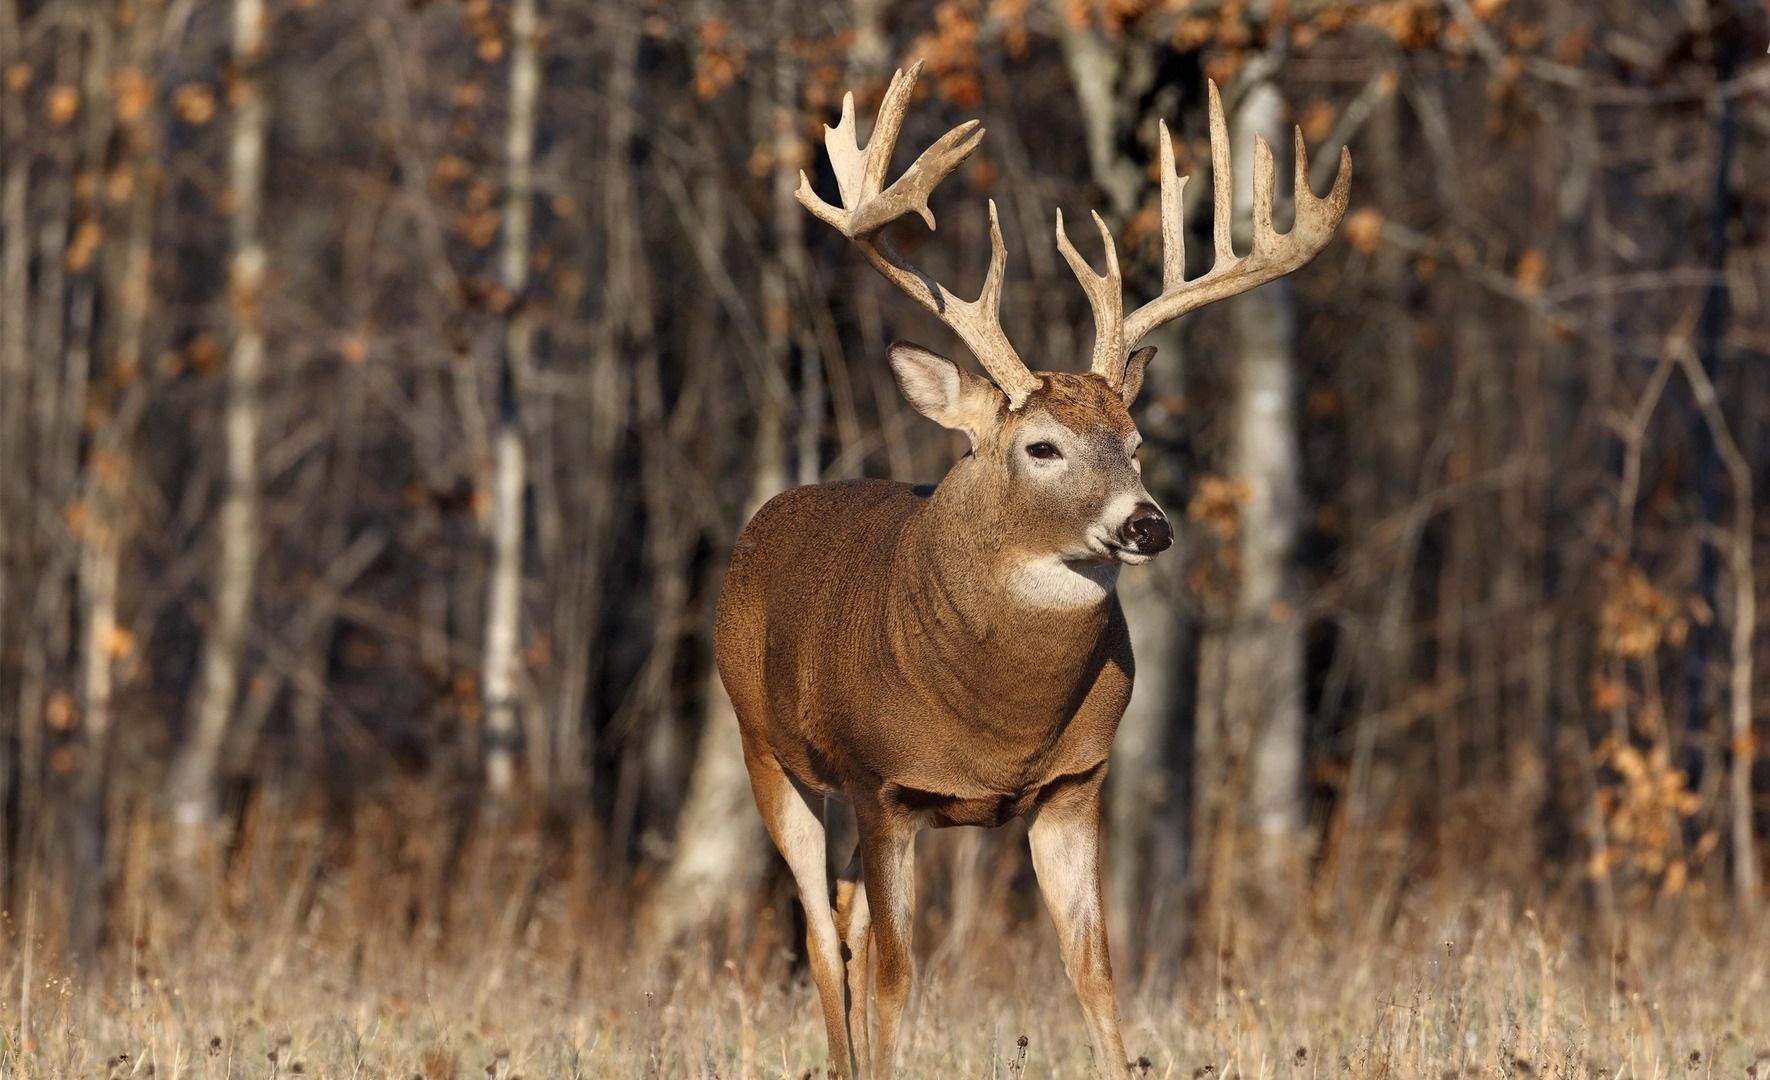 Deer Animal Facts and Image